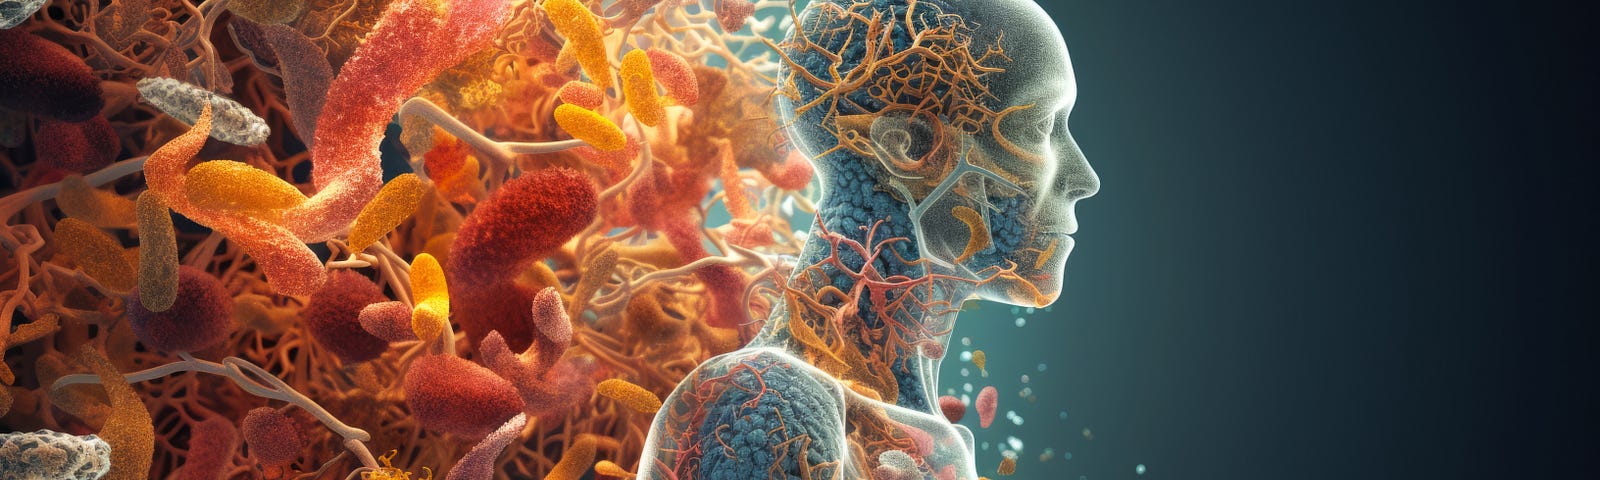 Abstract human microbiome — Close-up of man and microbes viruses, bacteria, fungi, genetic material, and intestinal flora.